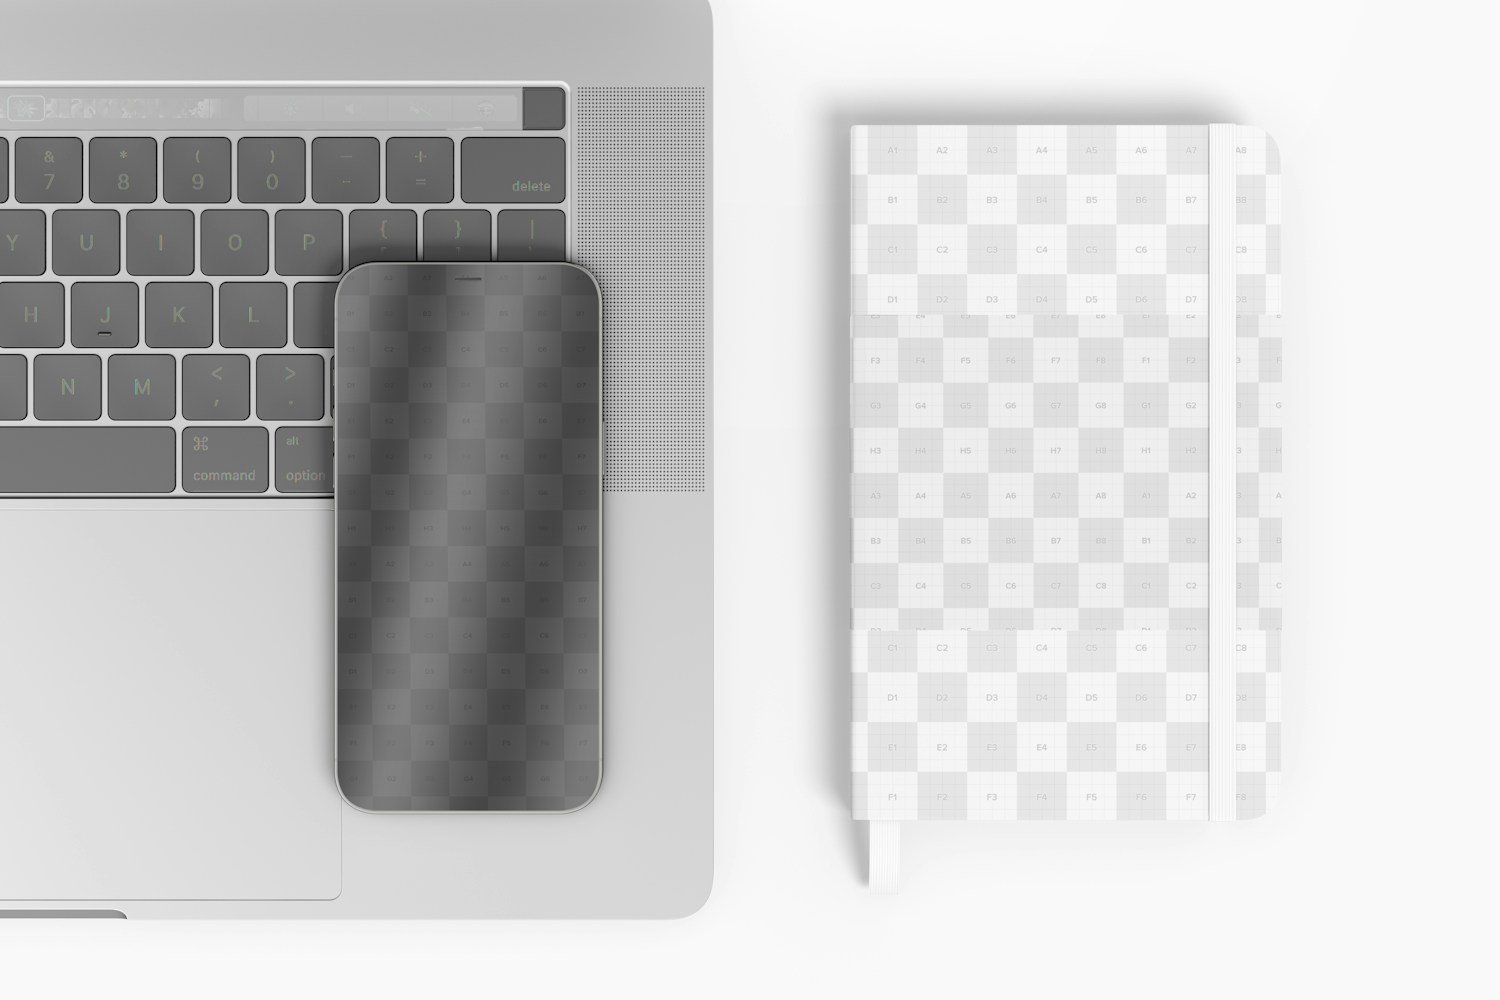 Notebook with Devices Mockup, Top View